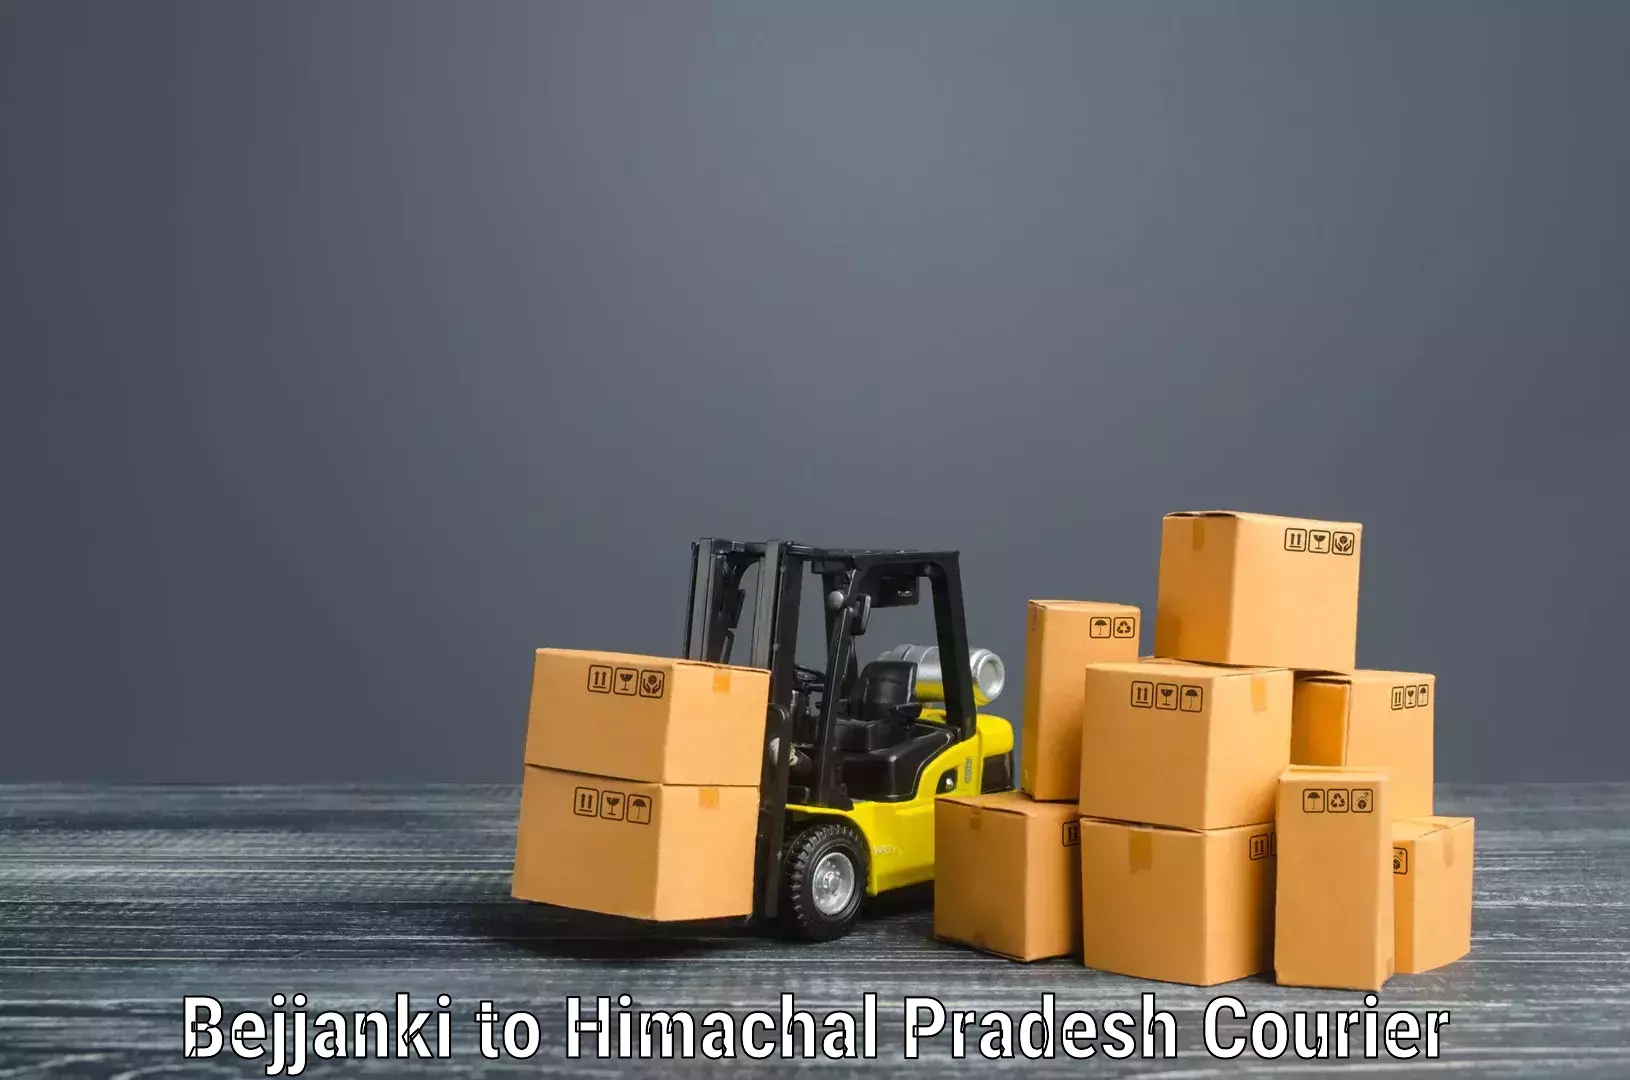 Efficient packing and moving Bejjanki to Jukhala